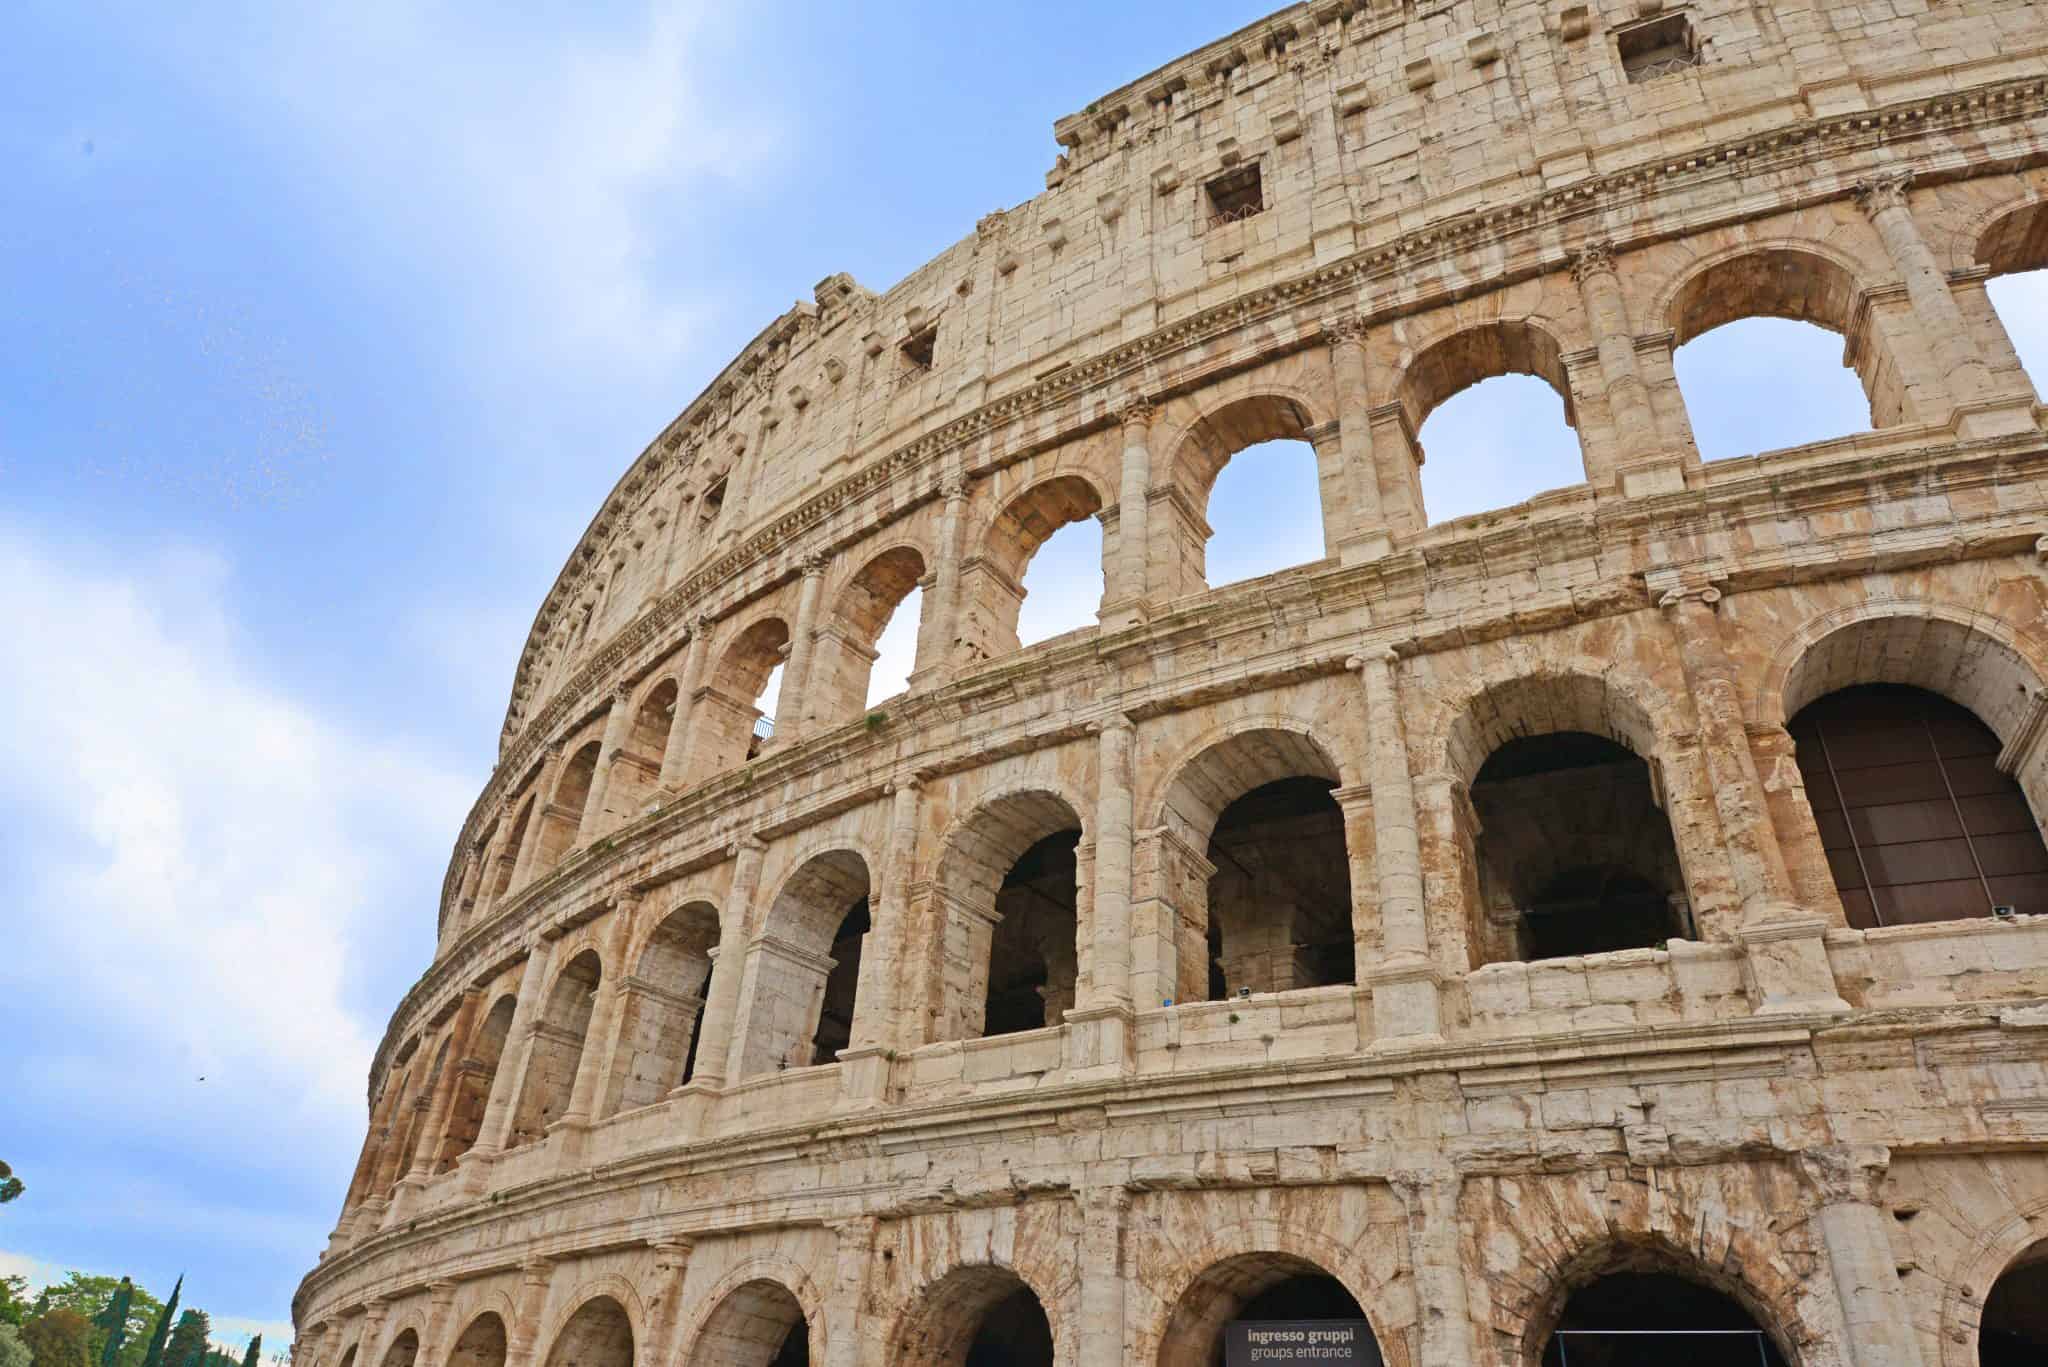 Day 3 of your Rome walk tour covers the Colosseum, Roman Forum, Palatine Hill, Arch of Constantine. Walk with the gladiators!